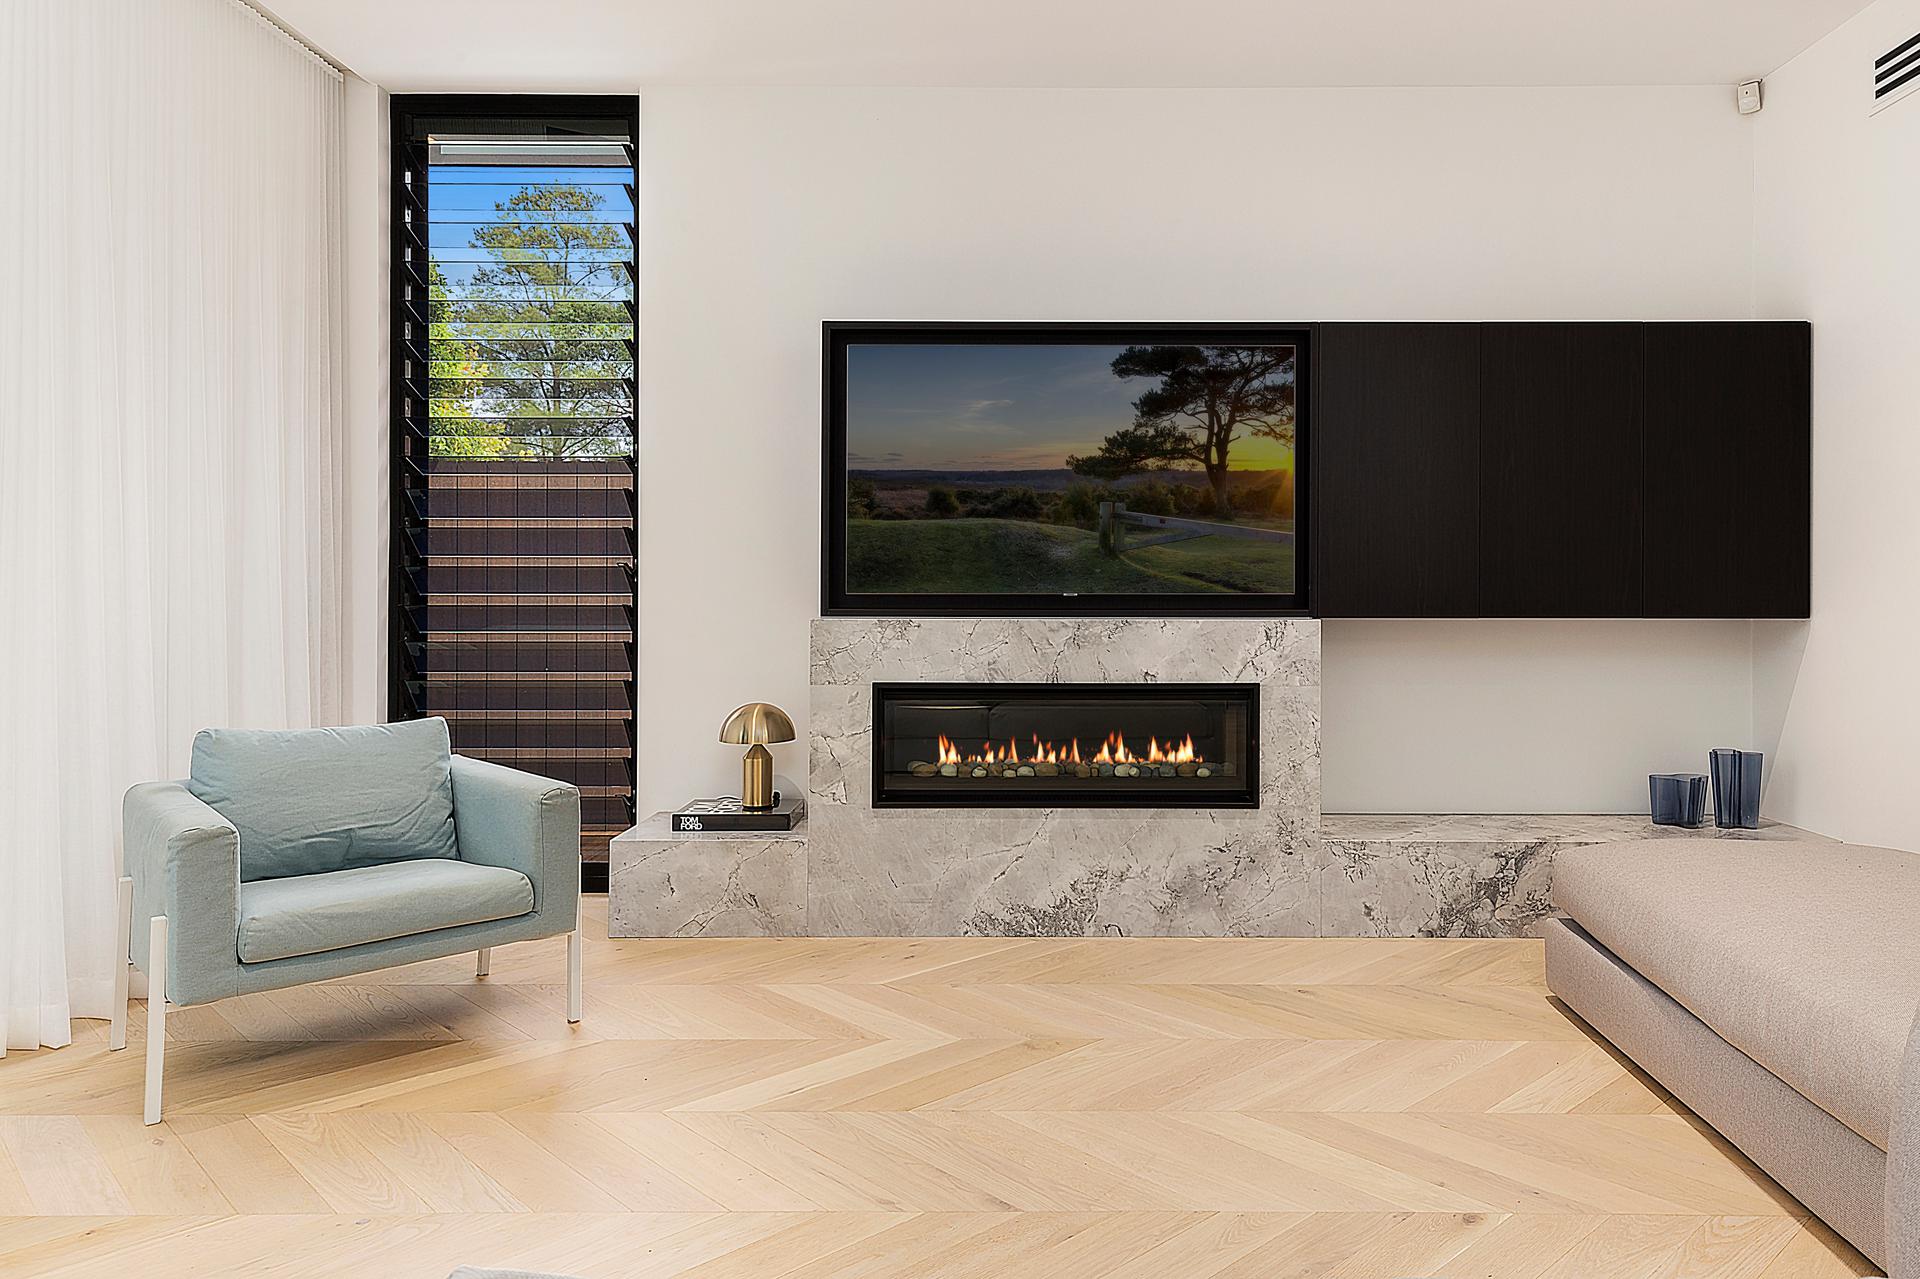 Fireplace with stone feature and Veneer push open AV cupboards - Concord, Sydney